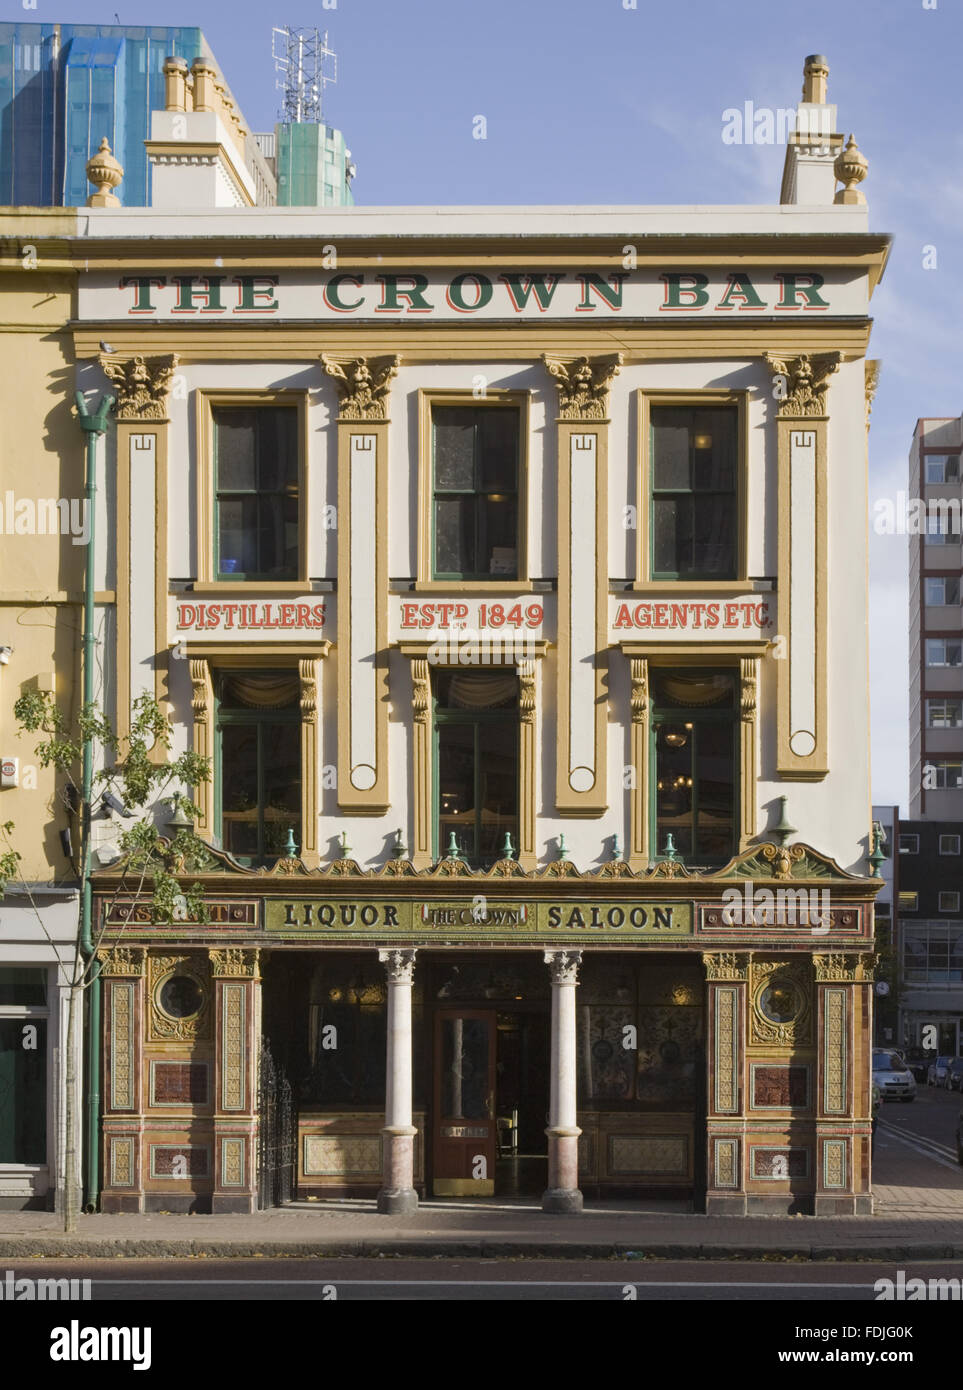 The Crown Bar, Great Victoria Street, Belfast. Formerly known as the Crown Liquor Saloon, the pub building dates from 1826 but the wonderful late Victorian craftsmanship of the tiling, glass and woodwork undertaken by Italian workers dates from 1898. Stock Photo